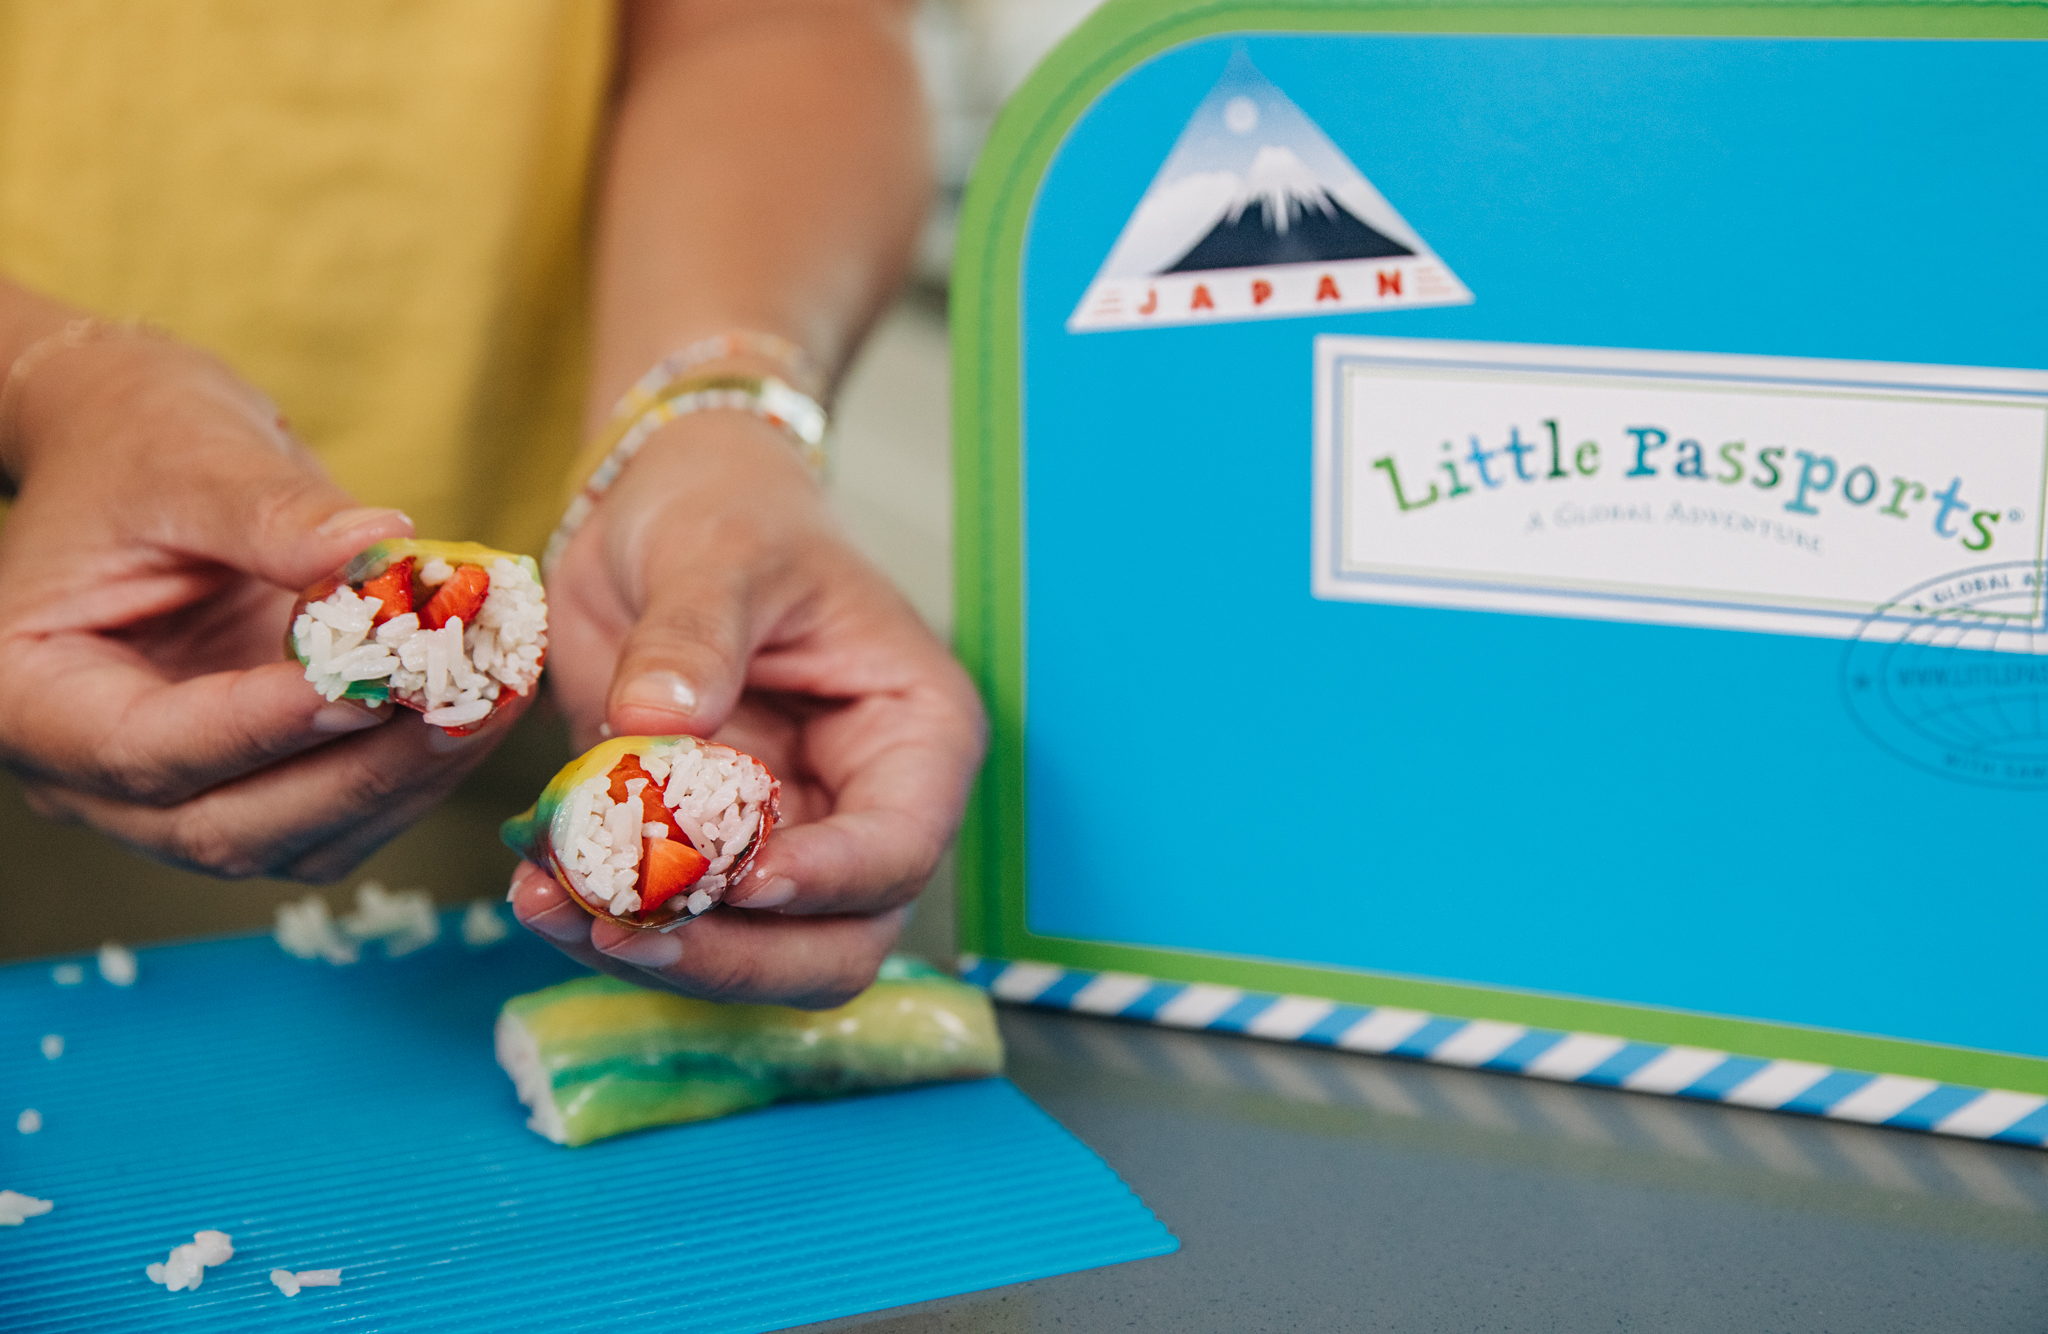 Enjoy the fruit sushi you made with Baby Boy Bakery and Little Passports!